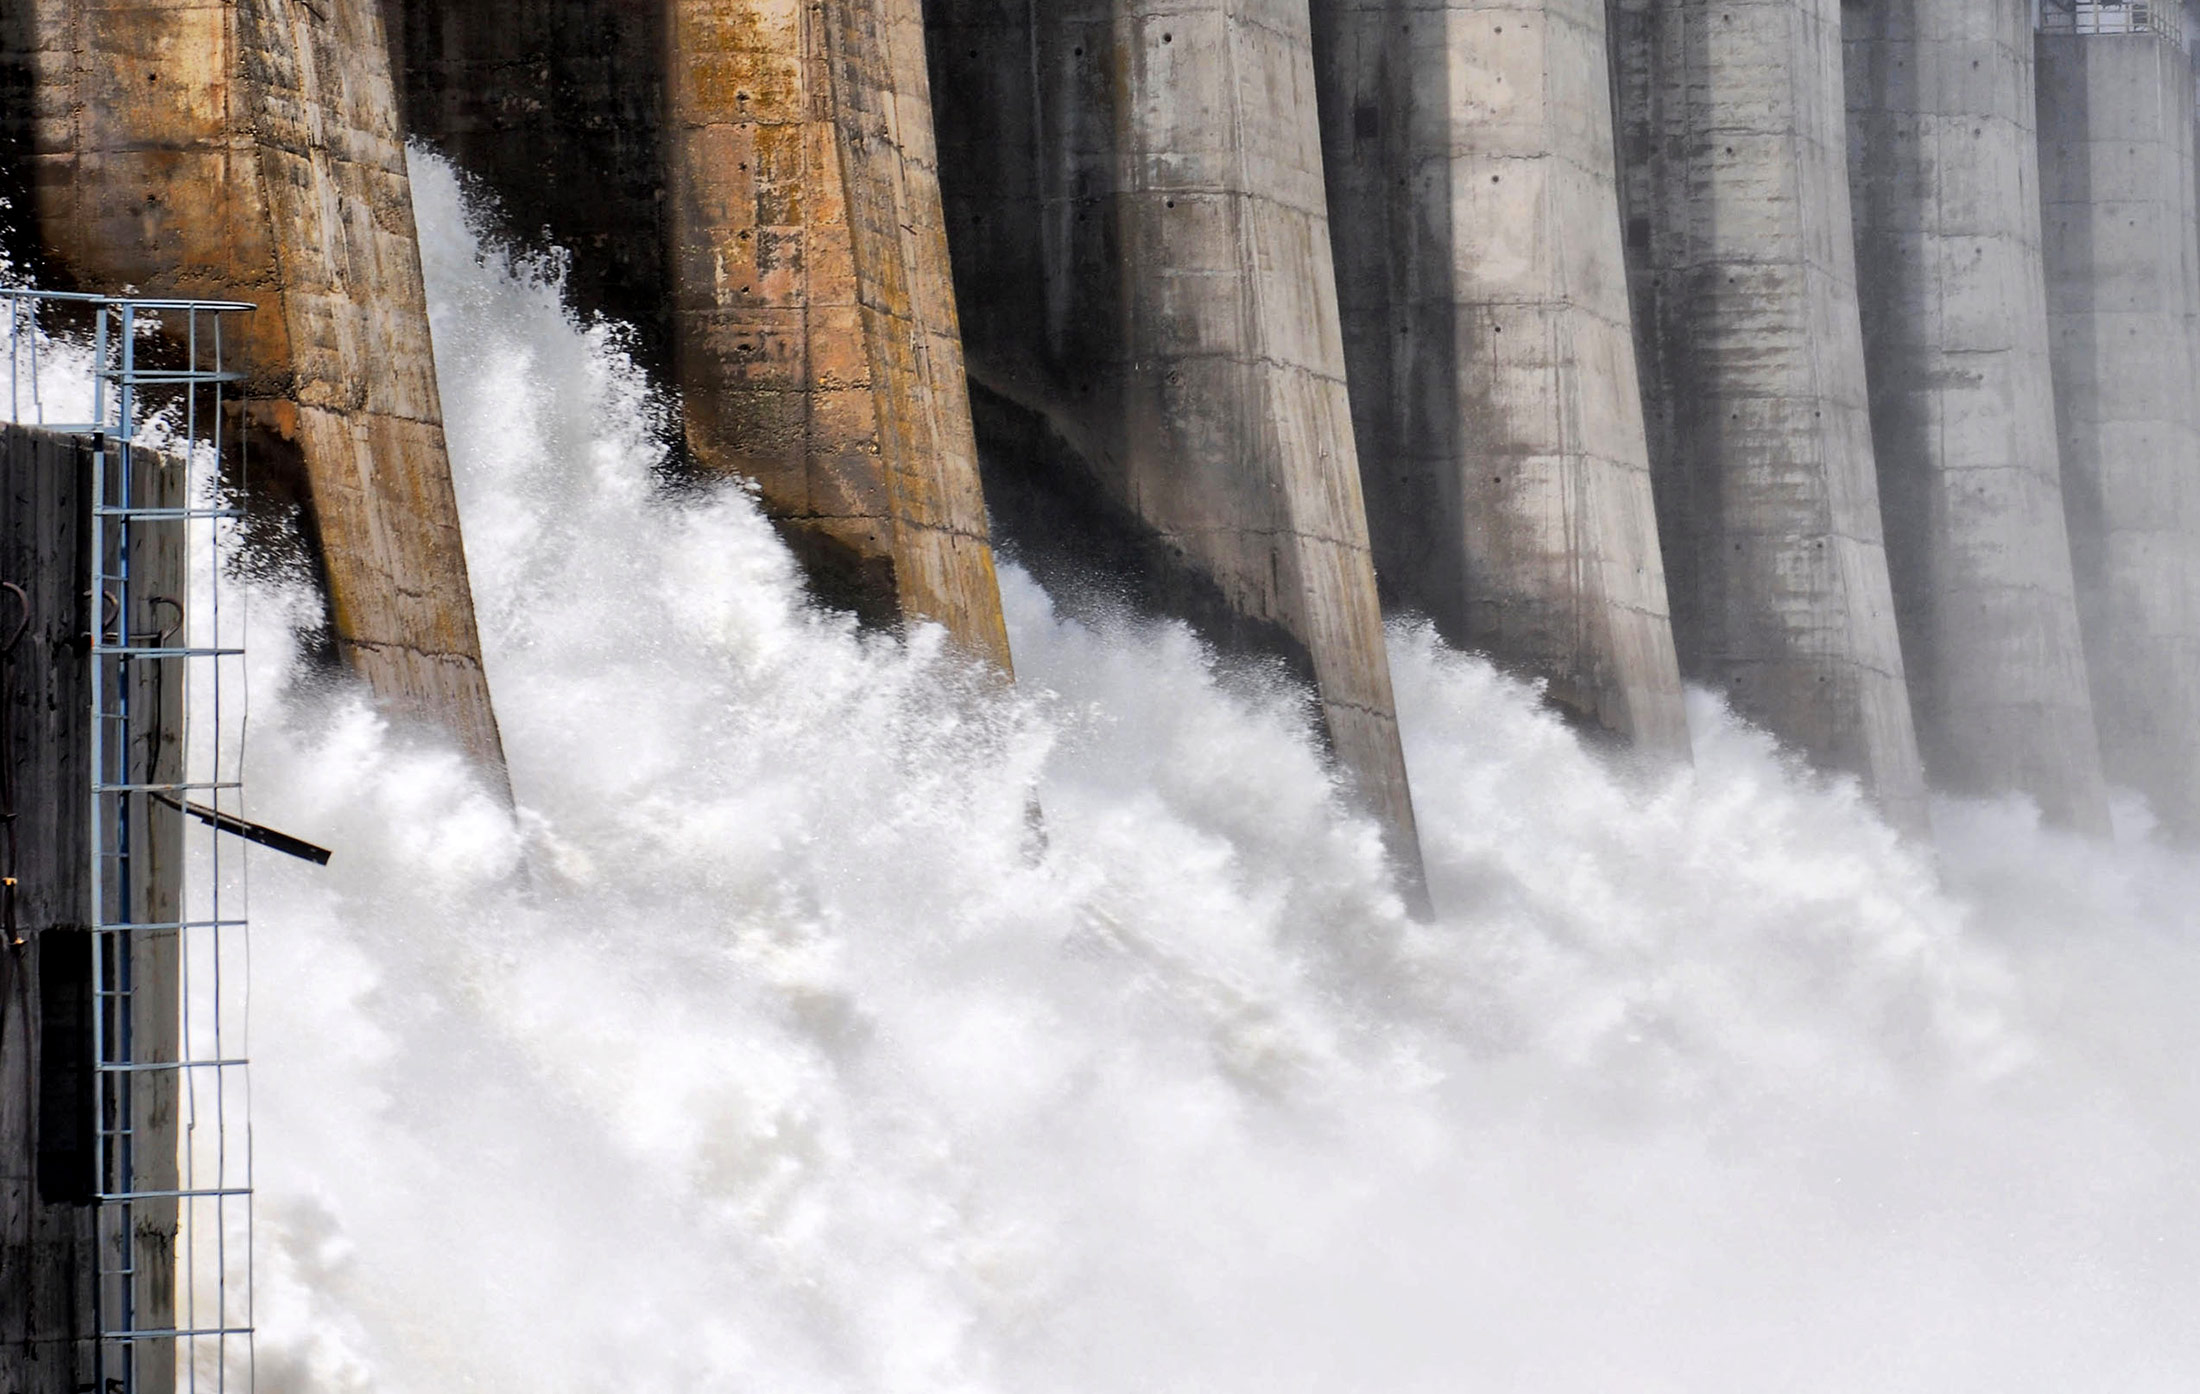 Water is released down the spillways at Djerdap 1, Serbia's largest hydro-electric power plant which is operated by Elektroprivreda Srbije, on the Danube river in Kladovo, Serbia, on Wednesday, May 4, 2011. Serbia expects as much as 9 billion euros ($13.4 billion) to be invested in the overhaul and development of its energy sector by 2015, according to Dusan Mrakic, a state secretary with the Energy and Mining Ministry.
